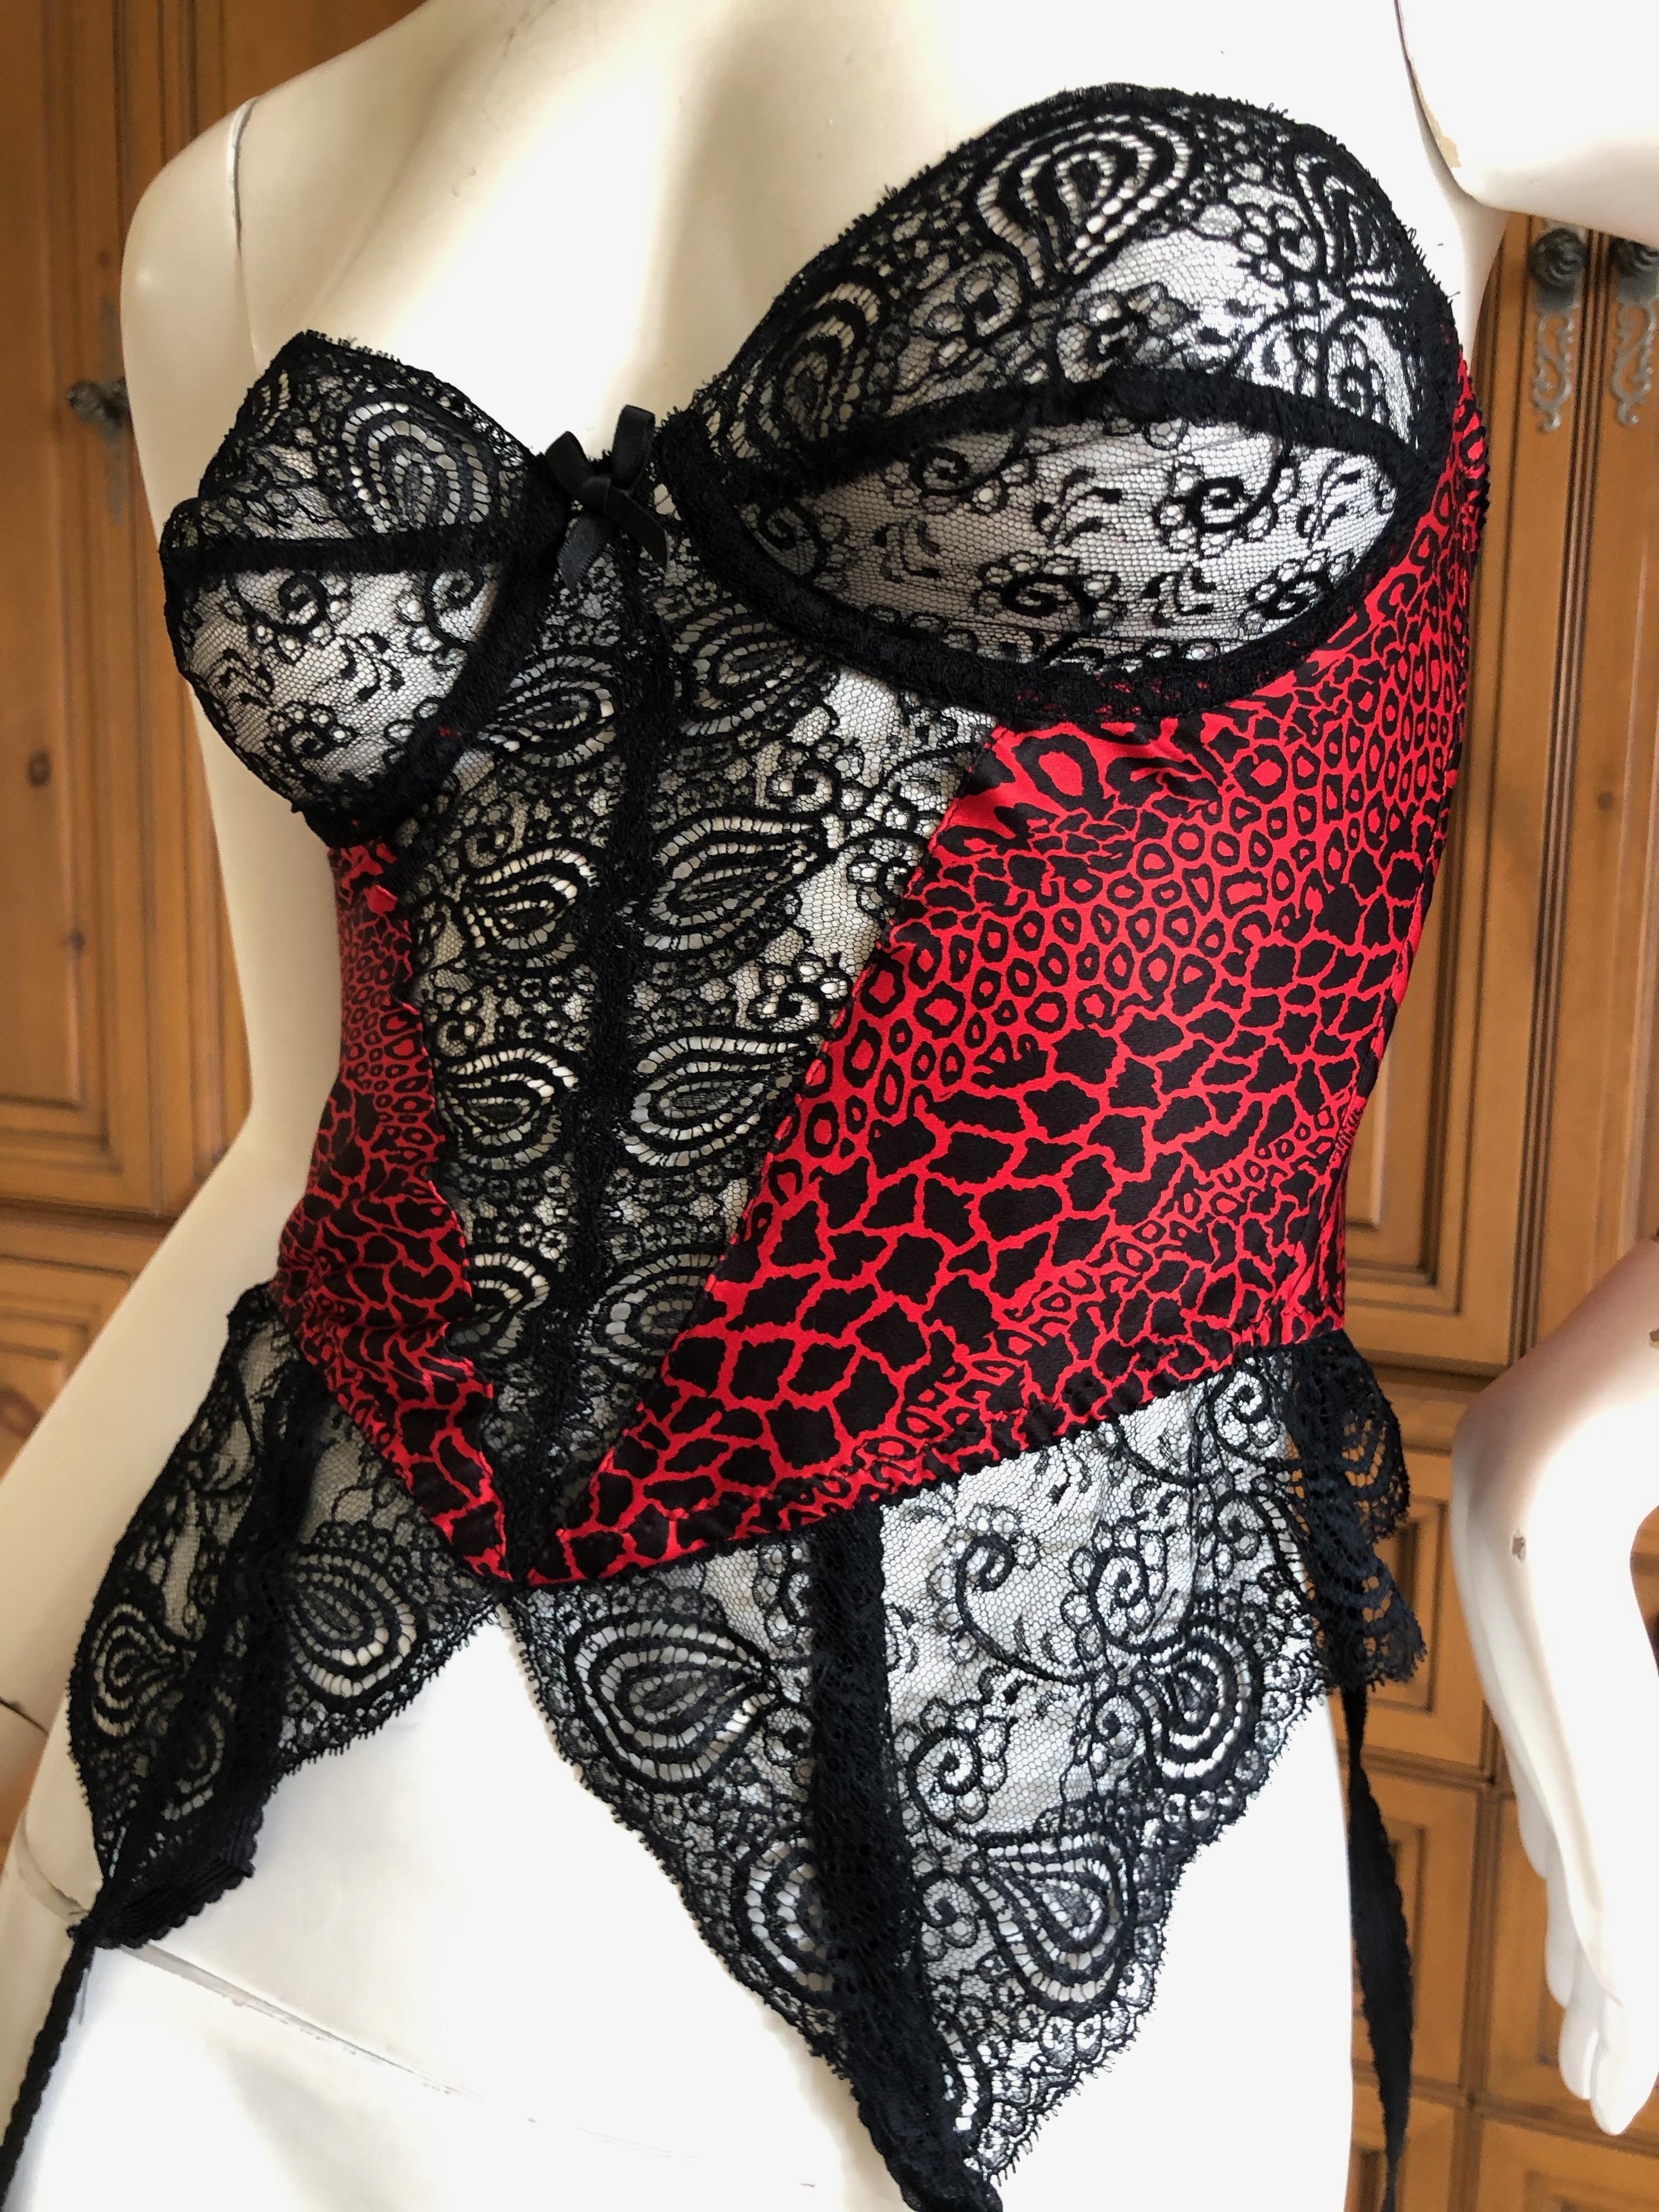 Gianni Versace Intime 1980's Leopard and Lace Corset with Garter Stays In Excellent Condition For Sale In Cloverdale, CA